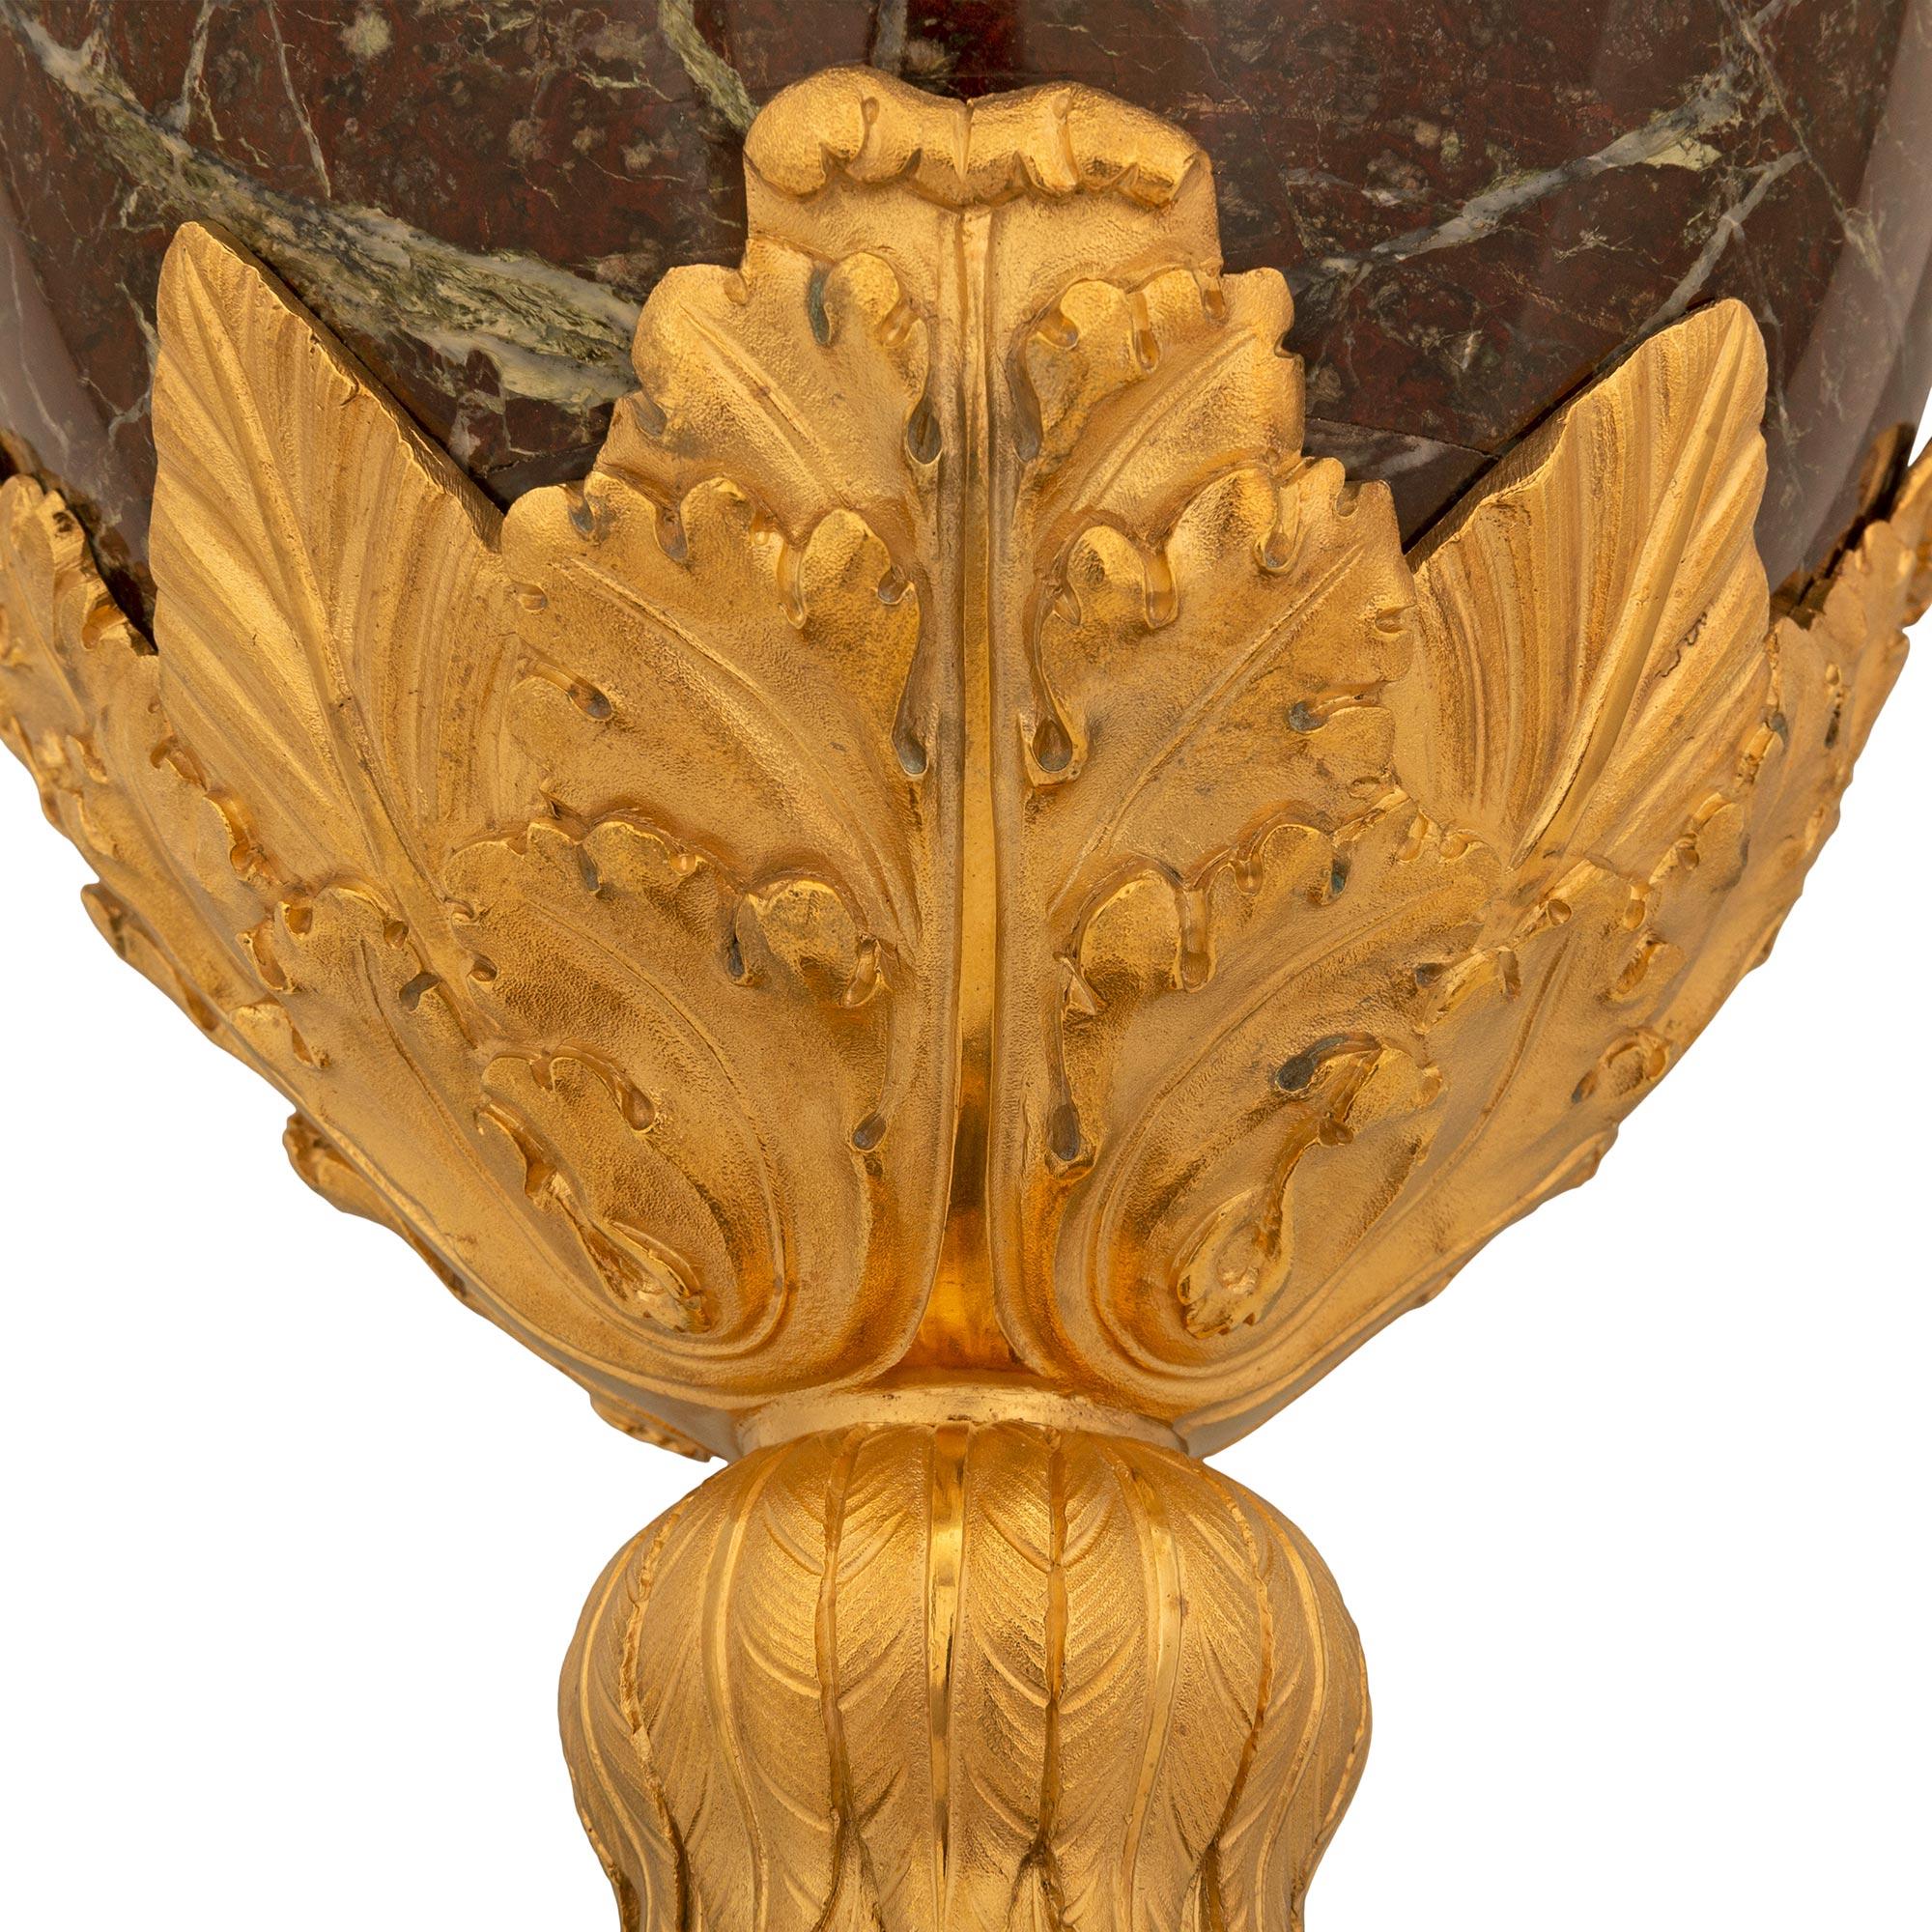 Pair of French 19th Century Belle Époque Period Marble and Ormolu Lidded Urns For Sale 4